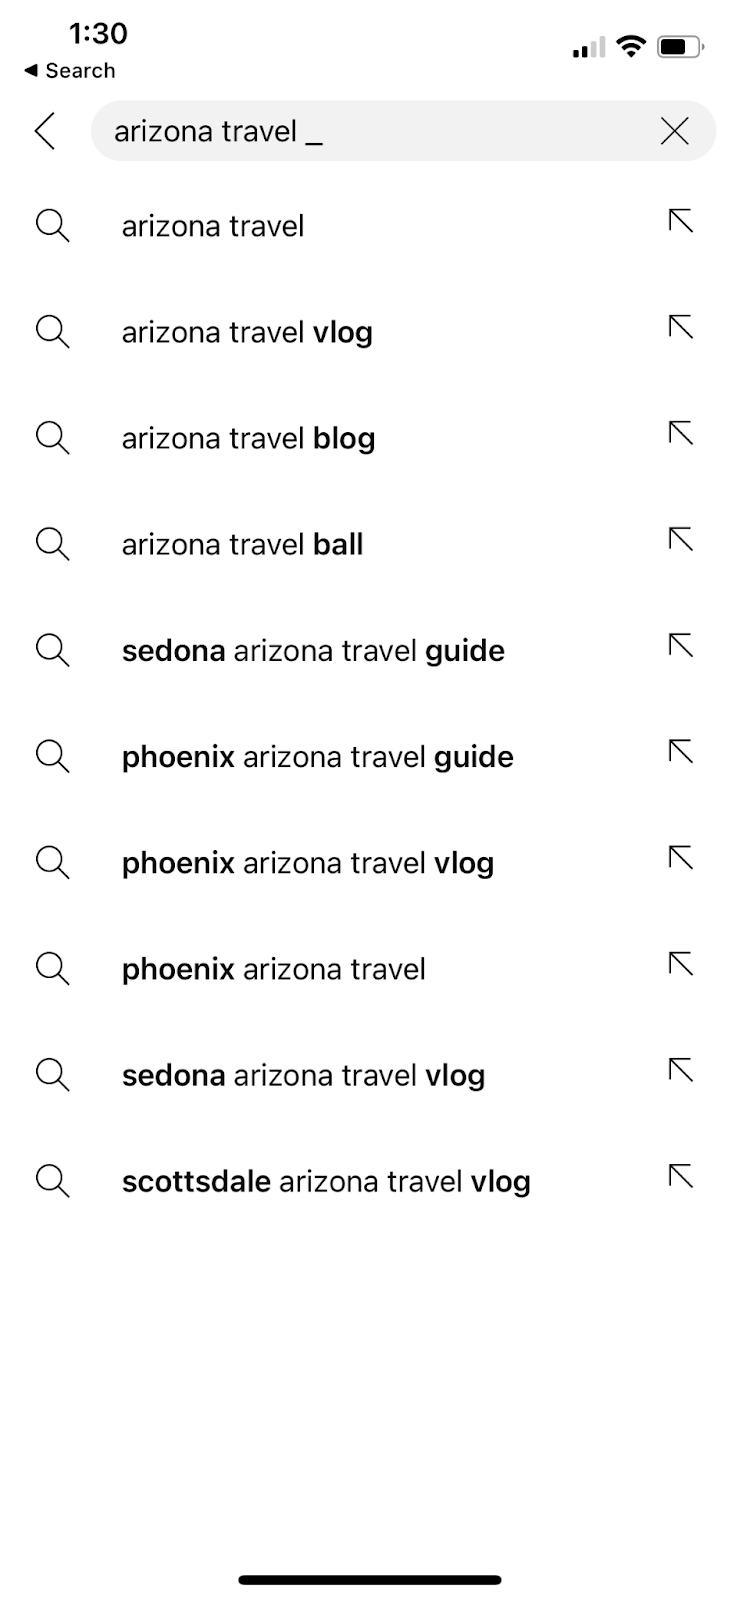 A screenshot of the search bar on Instagram and YouTube with the keyword “Arizona travel” in the search bar.